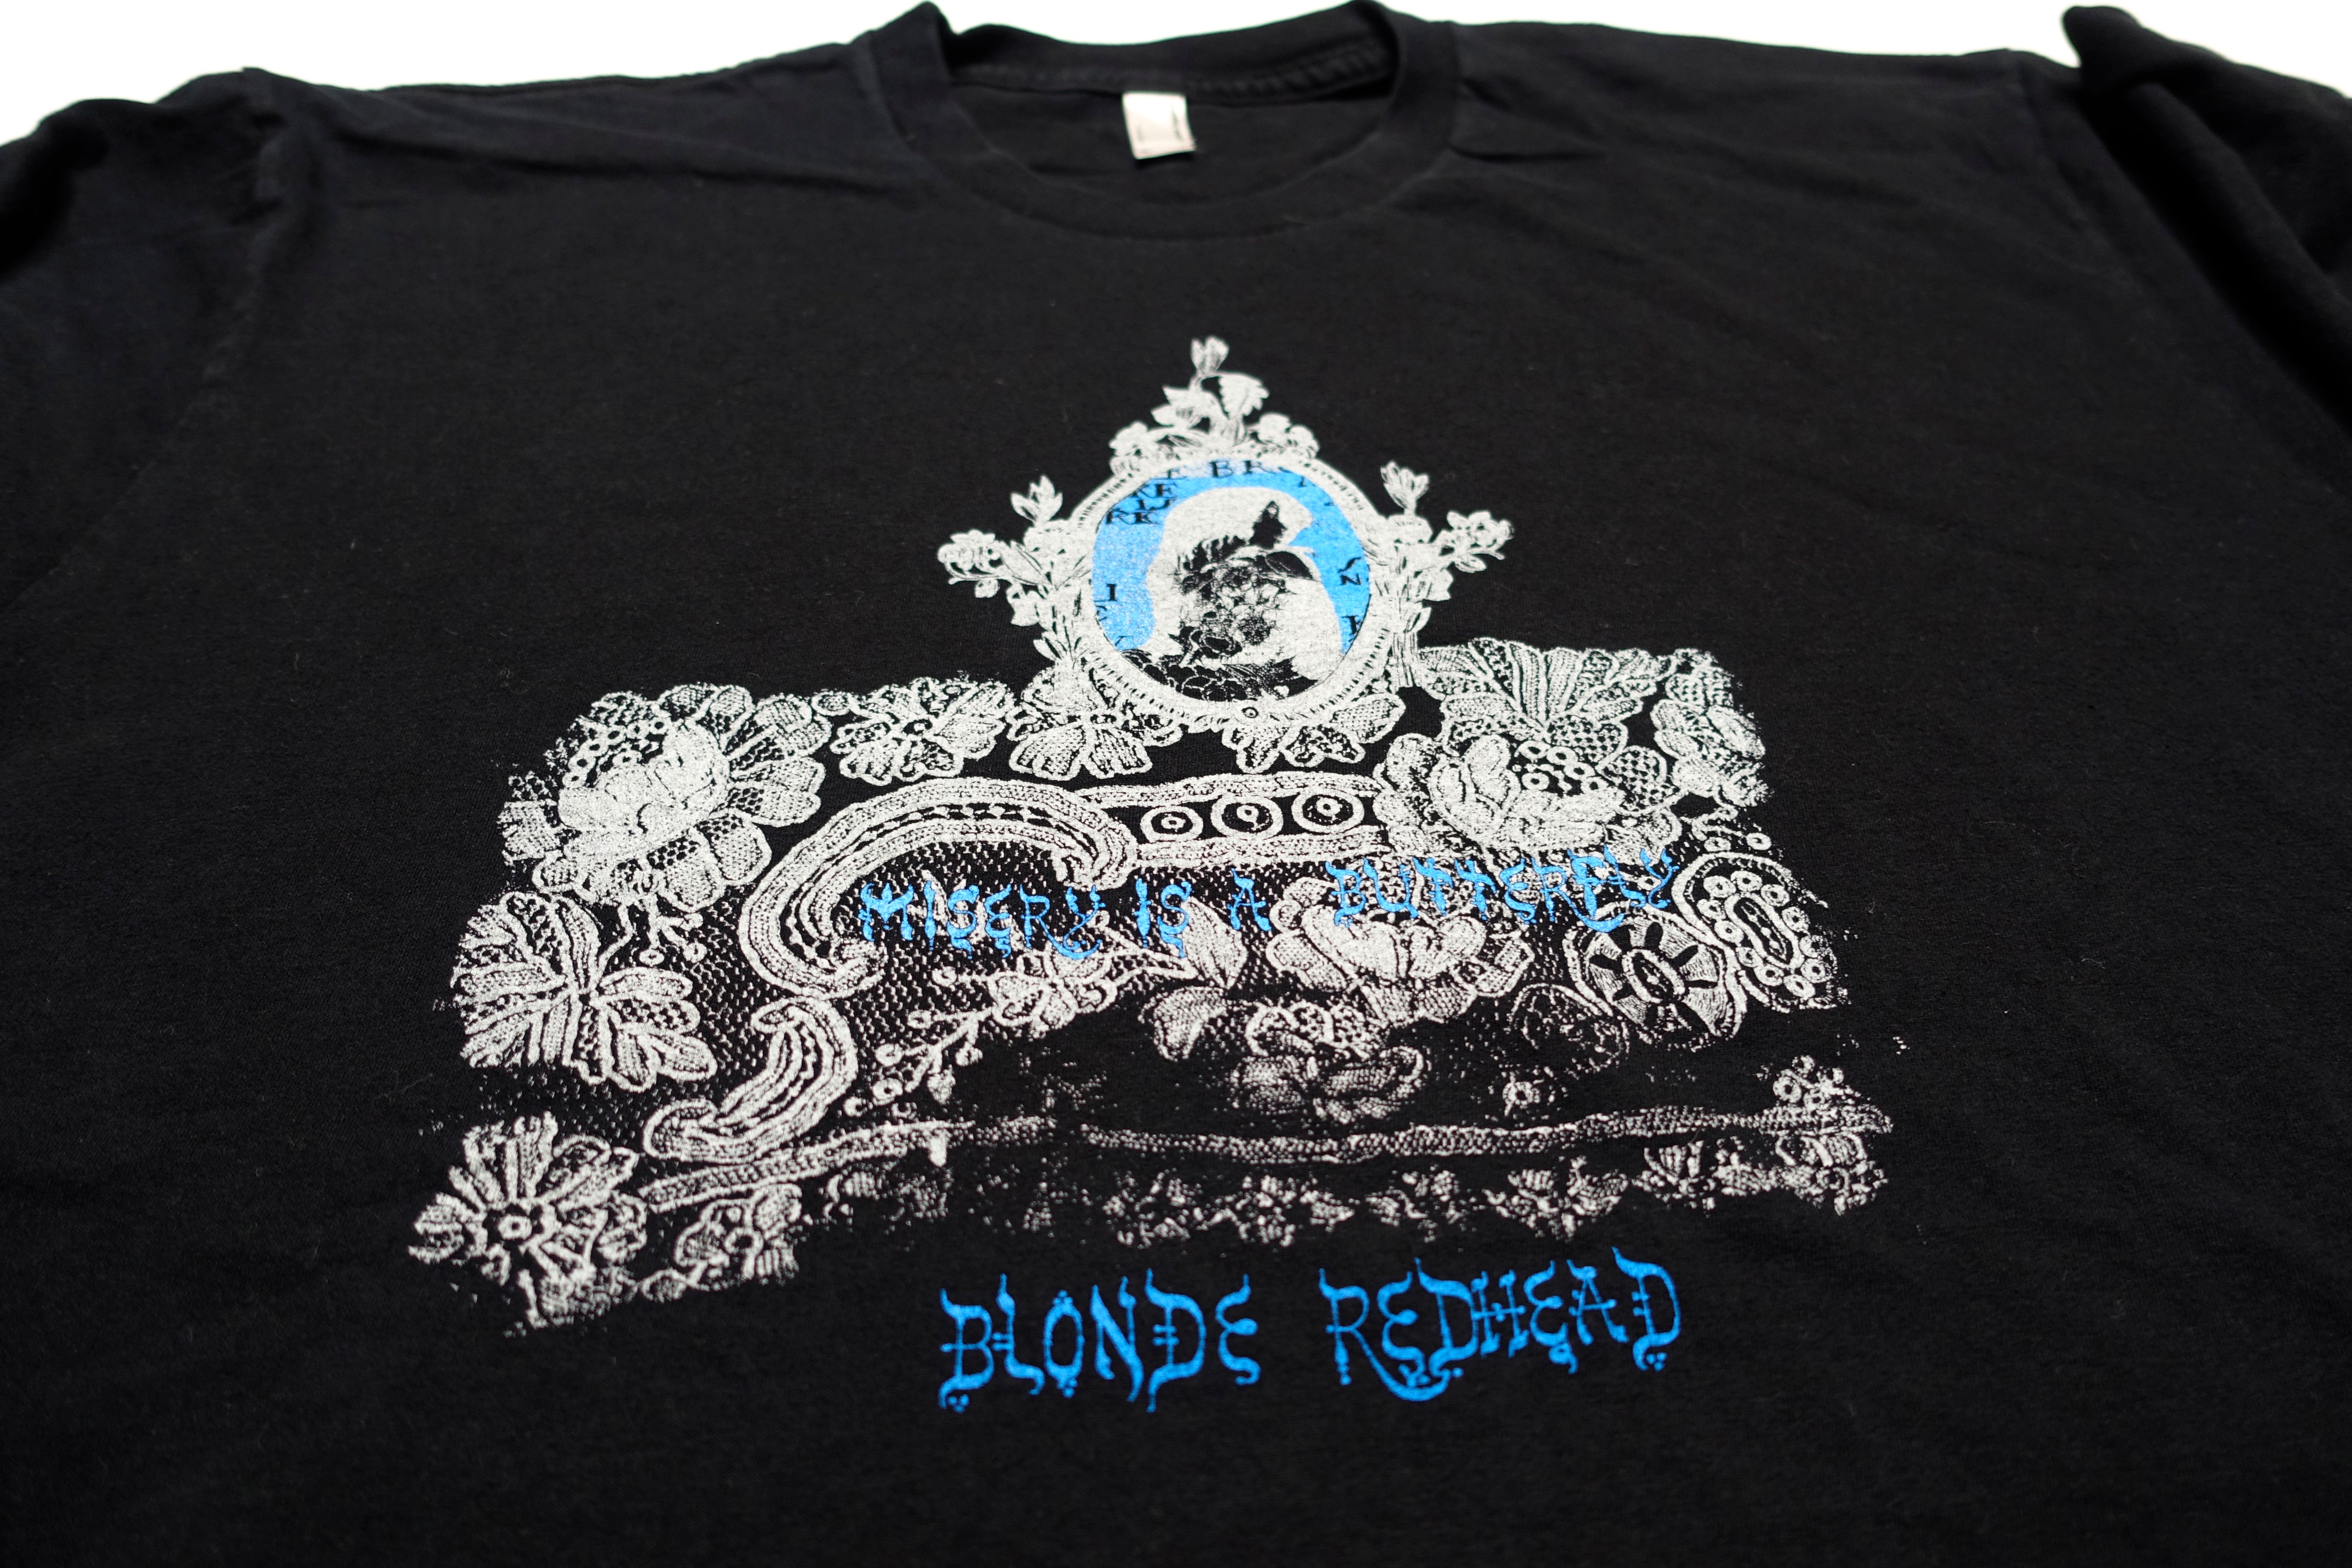 Blonde Redhead - Misery Is A Butterfly 2004 Tour Shirt Size XL